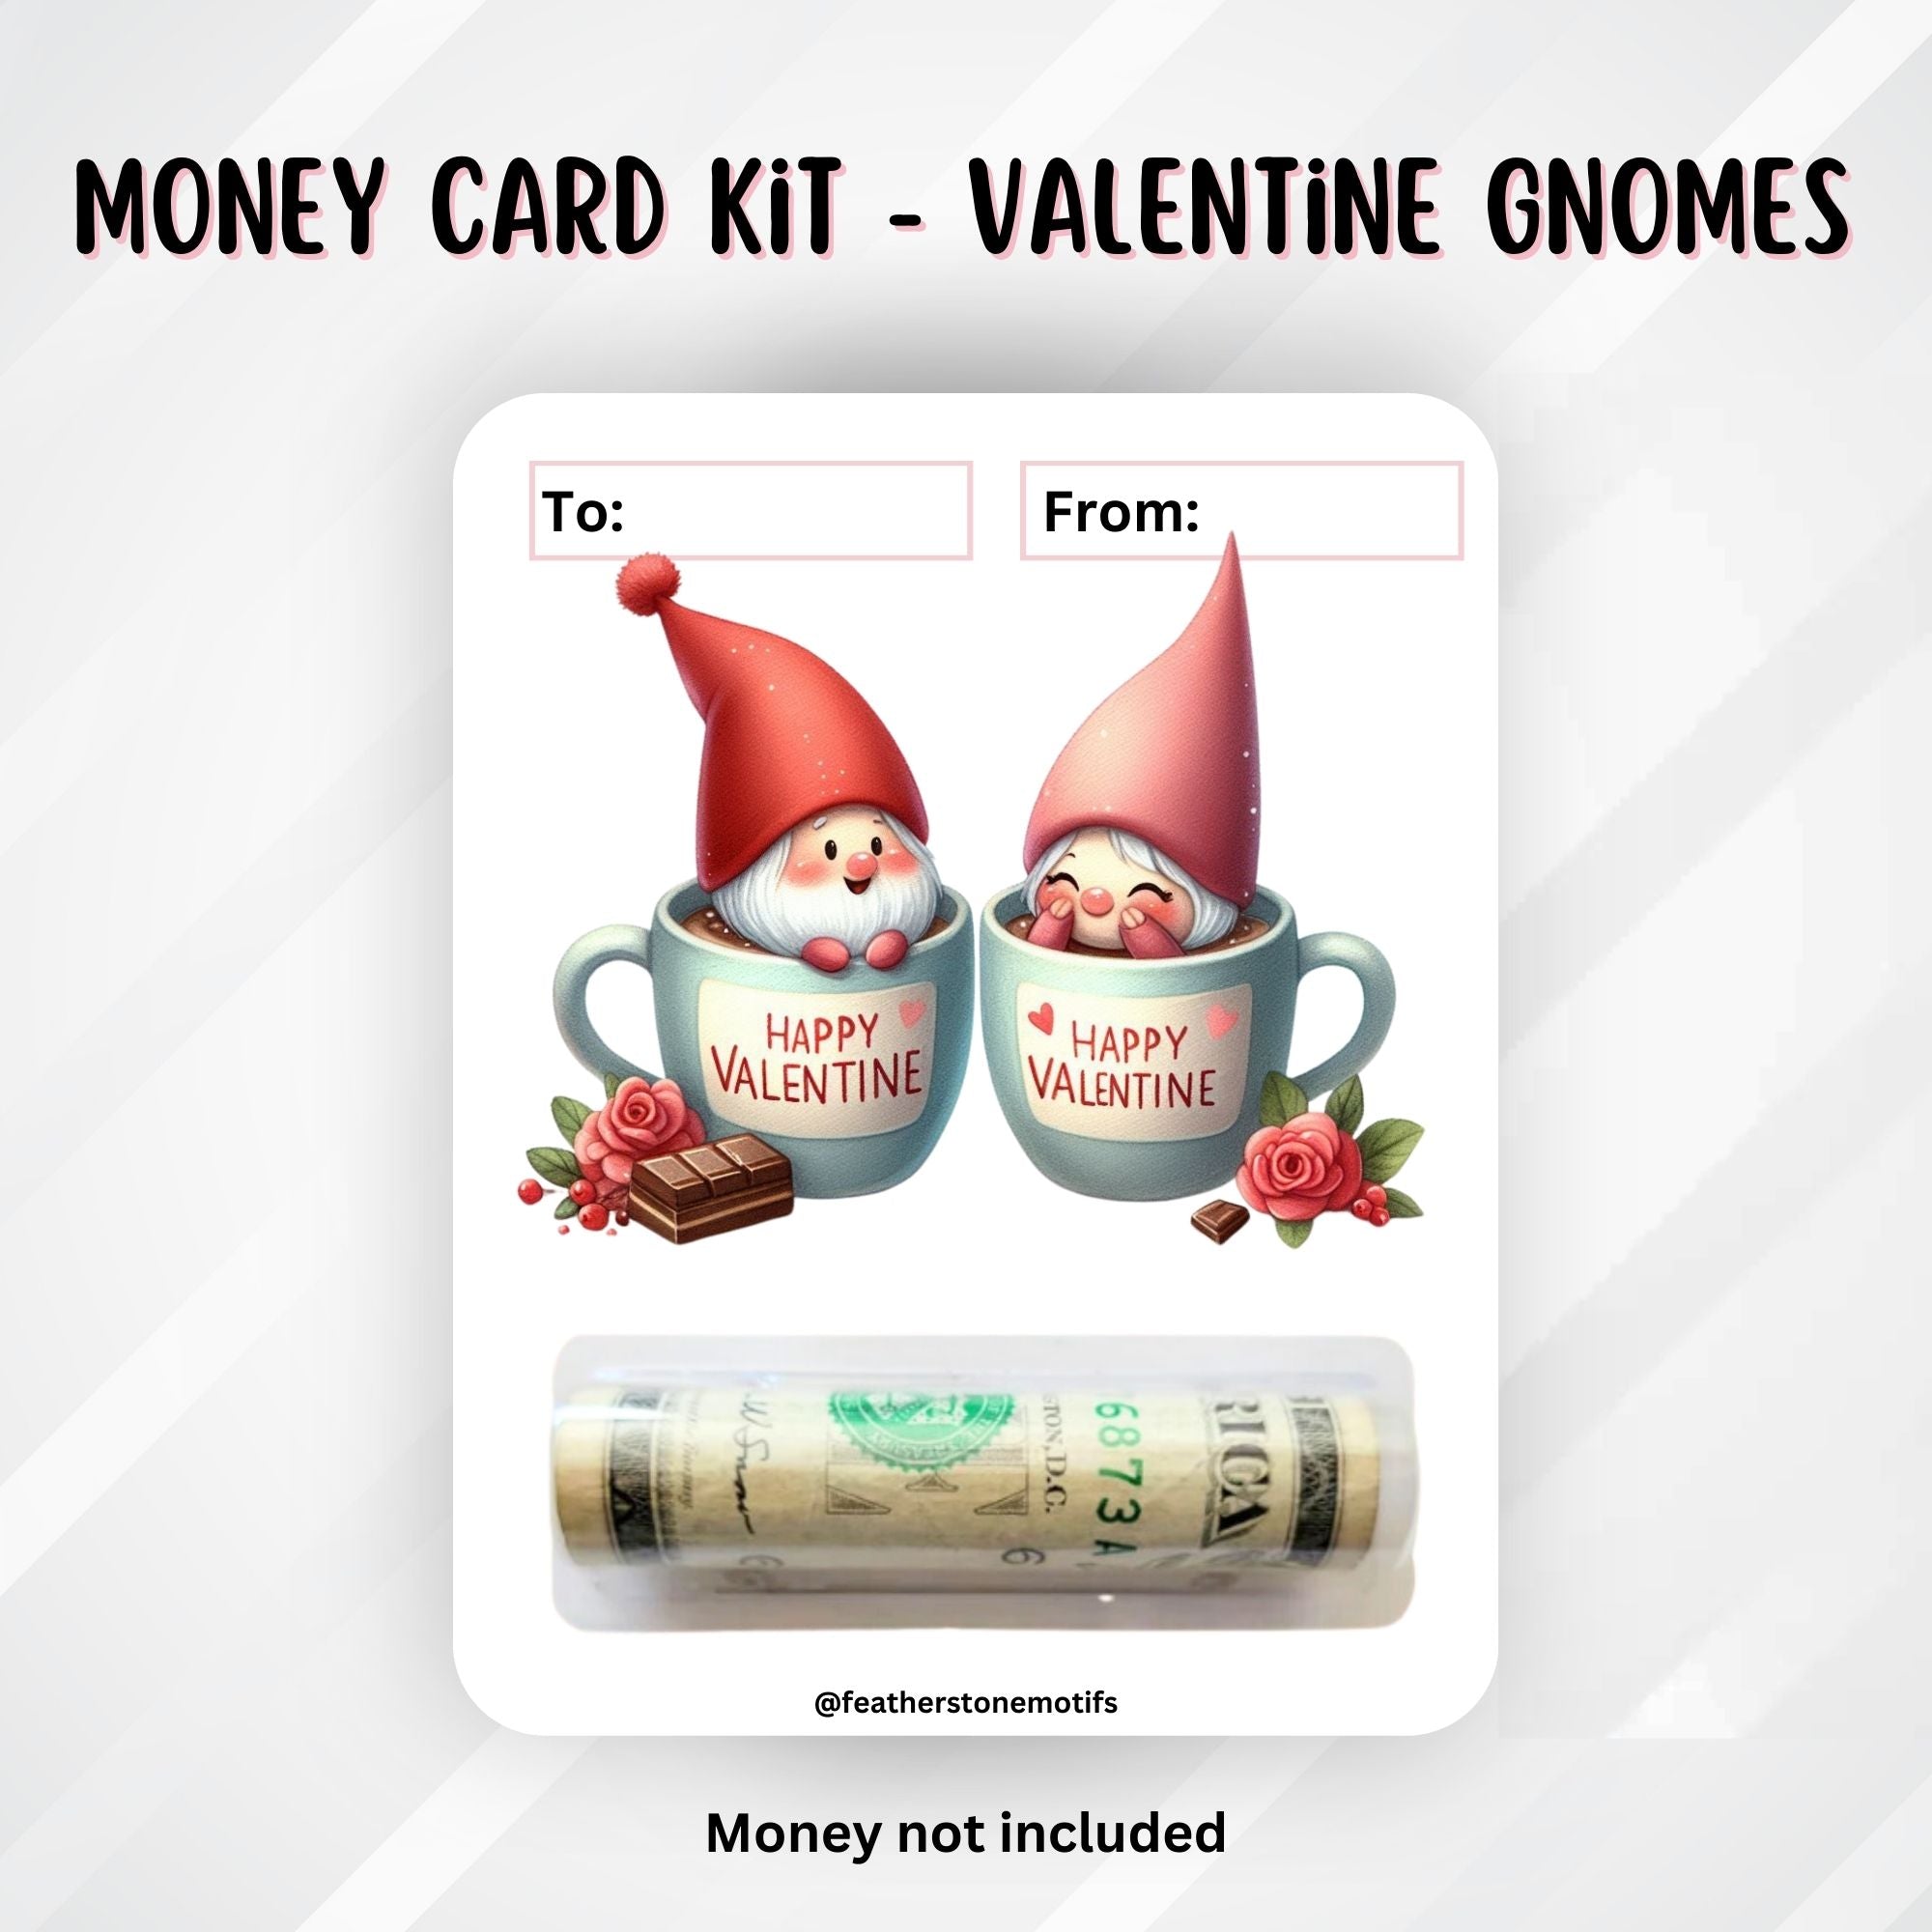 This image shows the money tube attached to the Gnomes Valentine Money Card.